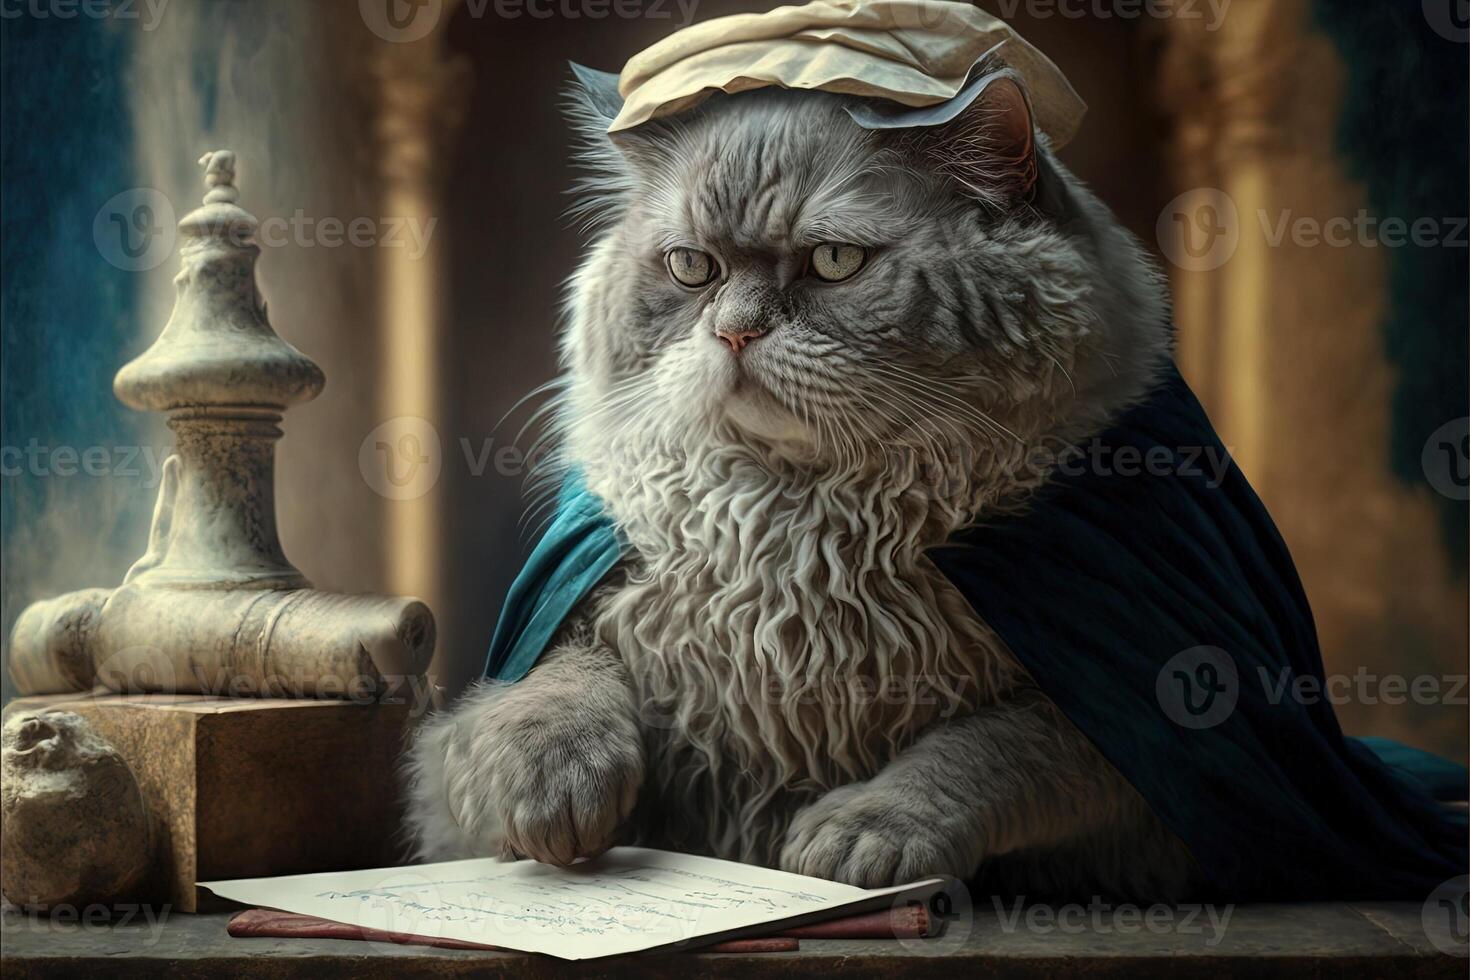 Archimedes Cat as famous historic character illustration photo